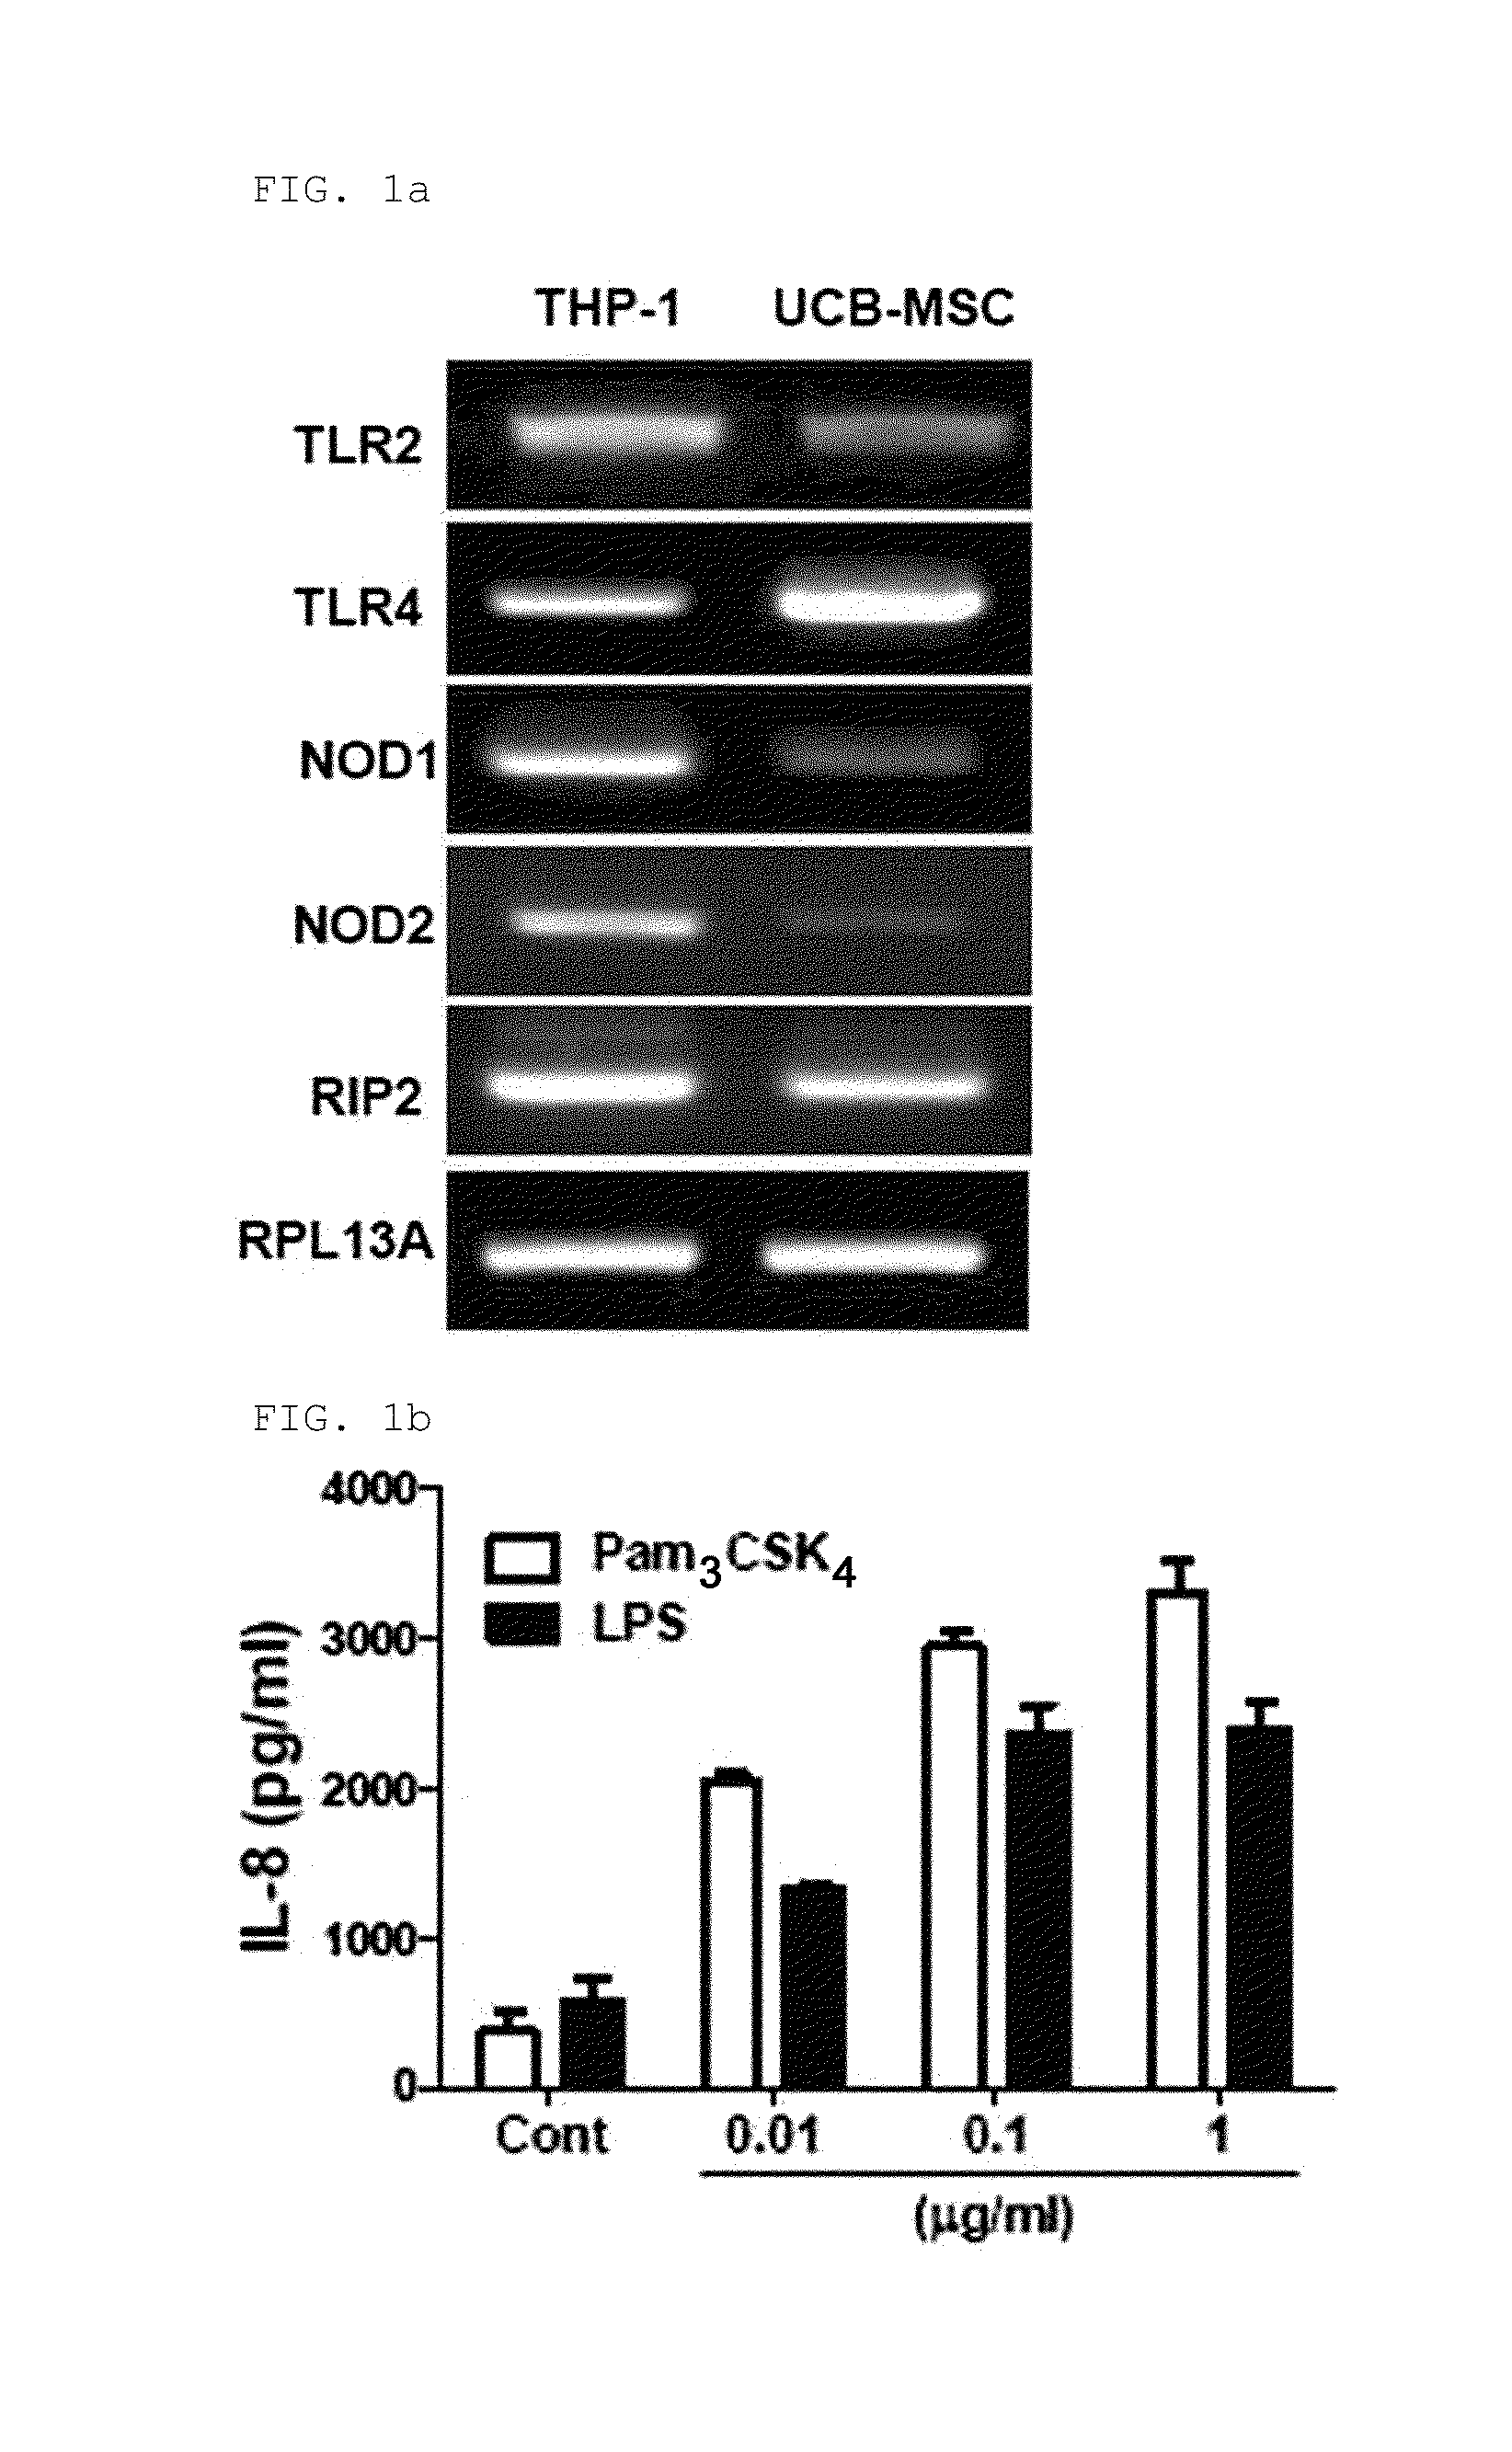 Pharmaceutical composition comprising stem cells treated with NOD2 agonist or culture thereof for prevention and treatment of immune disorders and inflammatory diseases